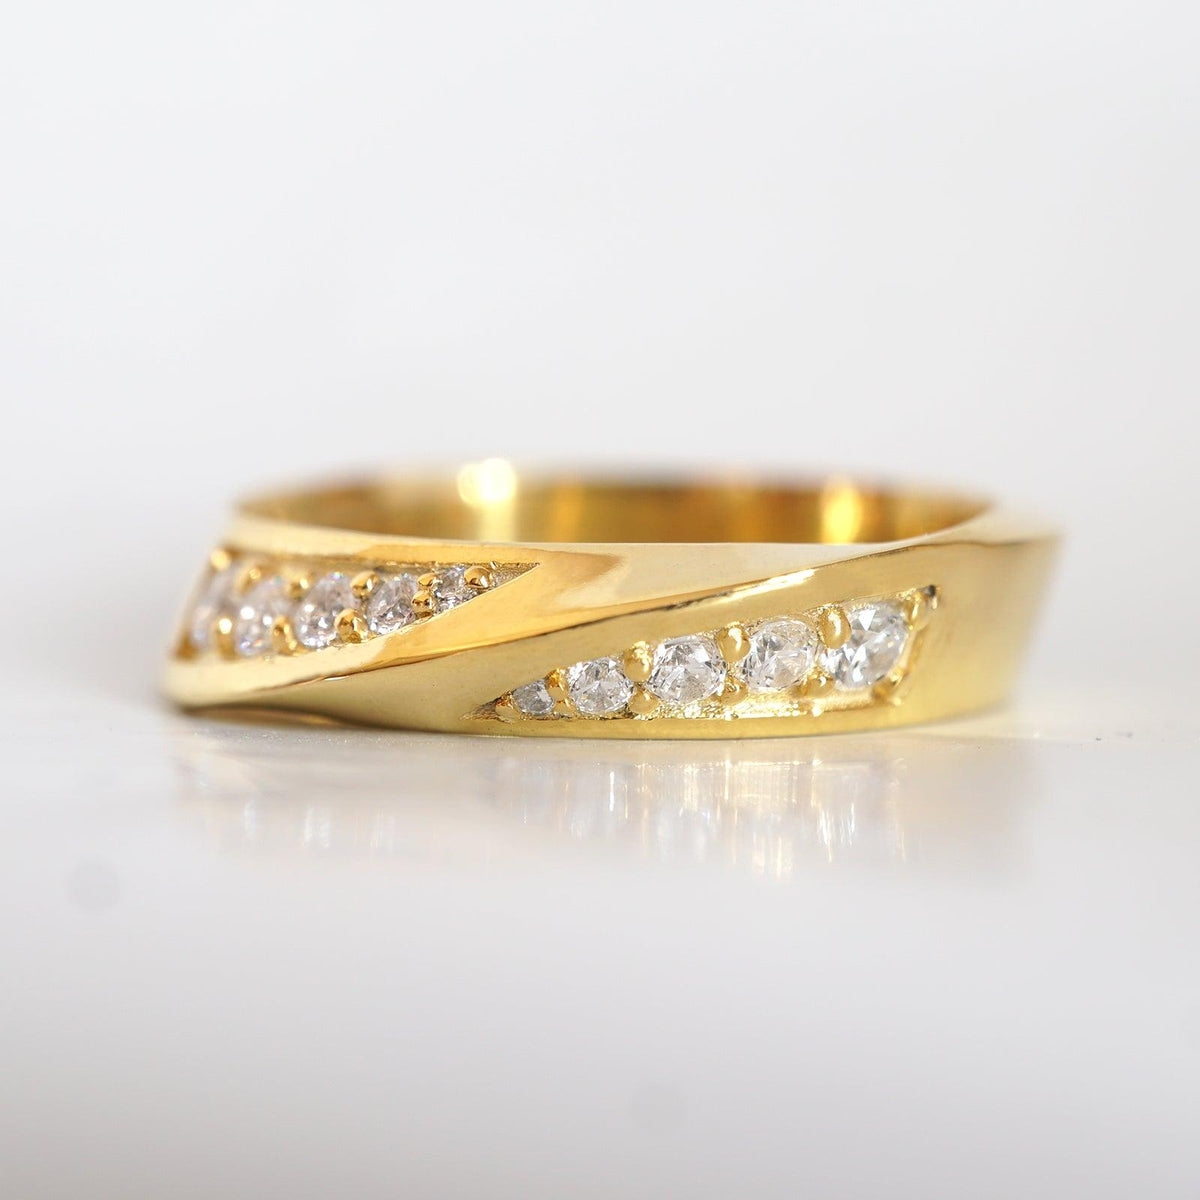 Spiral Diamond Ring in 14K and 18K Gold, 5mm - Tippy Taste Jewelry